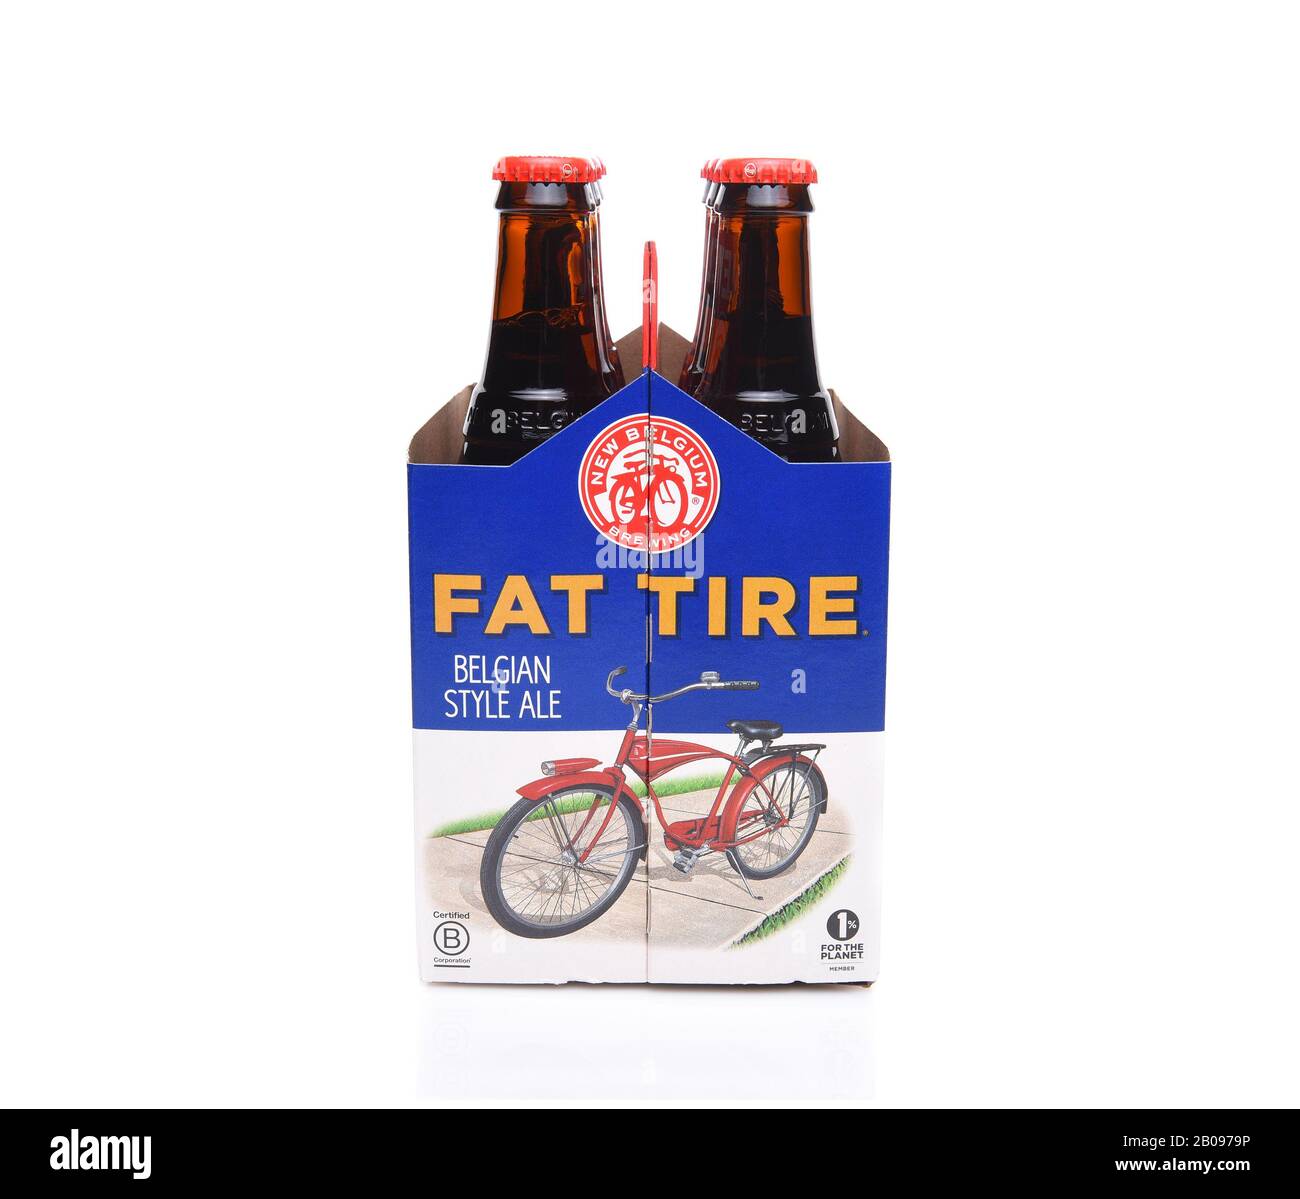 IRVINE, CALIFORNIA - December 14, 2017: Fat Tire Amber Ale. 6 Pack of of Fat Tire Amber Ale from the New Belgium Brewing Company, of Fort Collins, Col Stock Photo